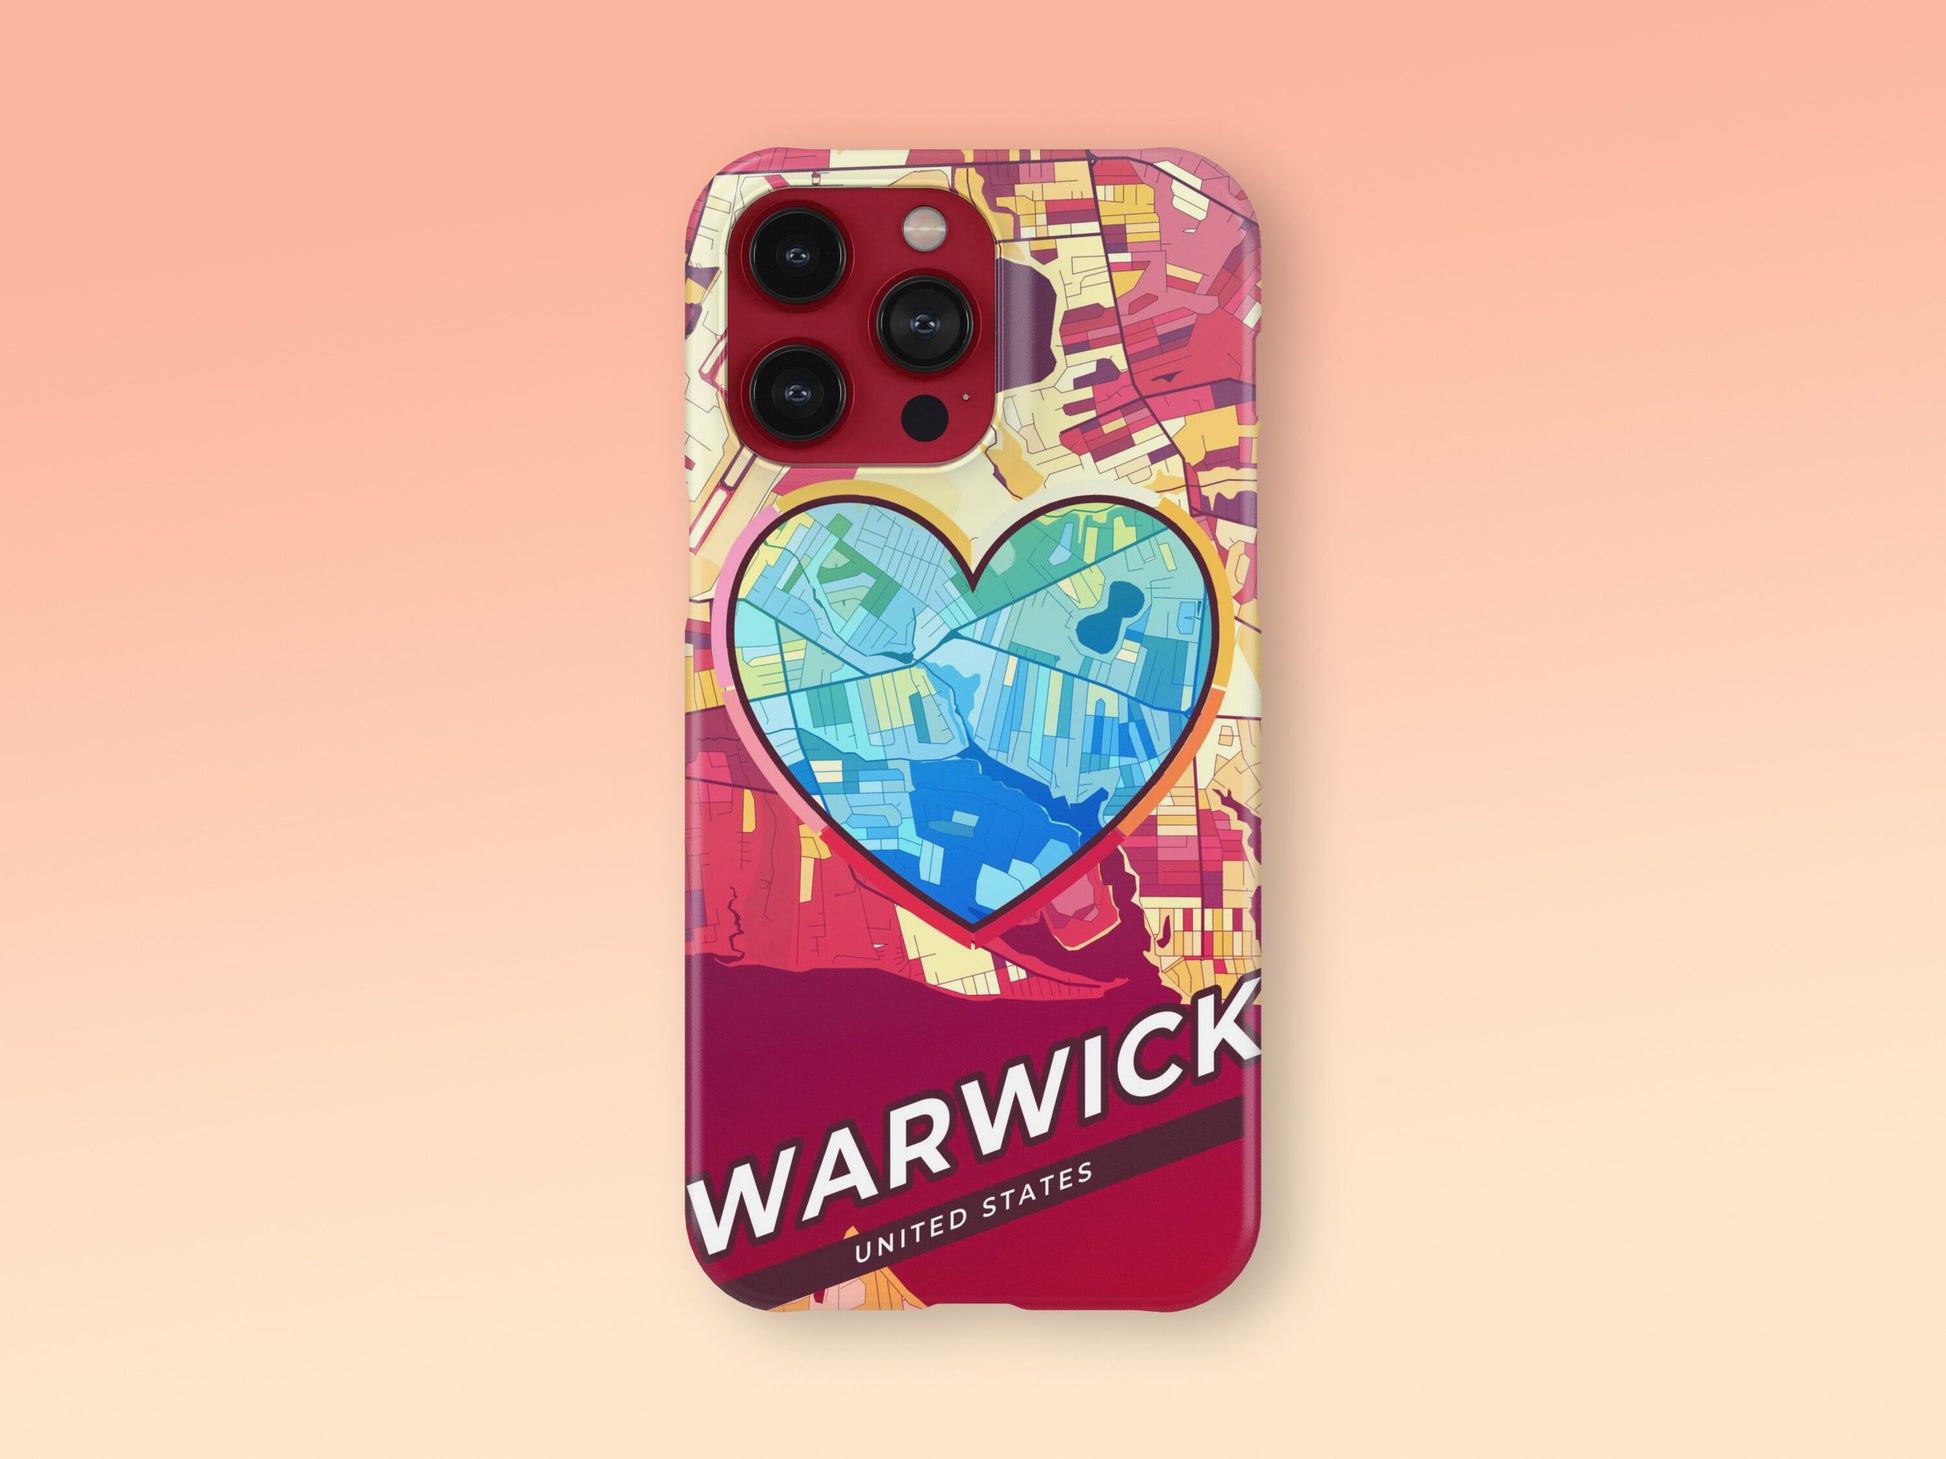 Warwick Rhode Island slim phone case with colorful icon 2